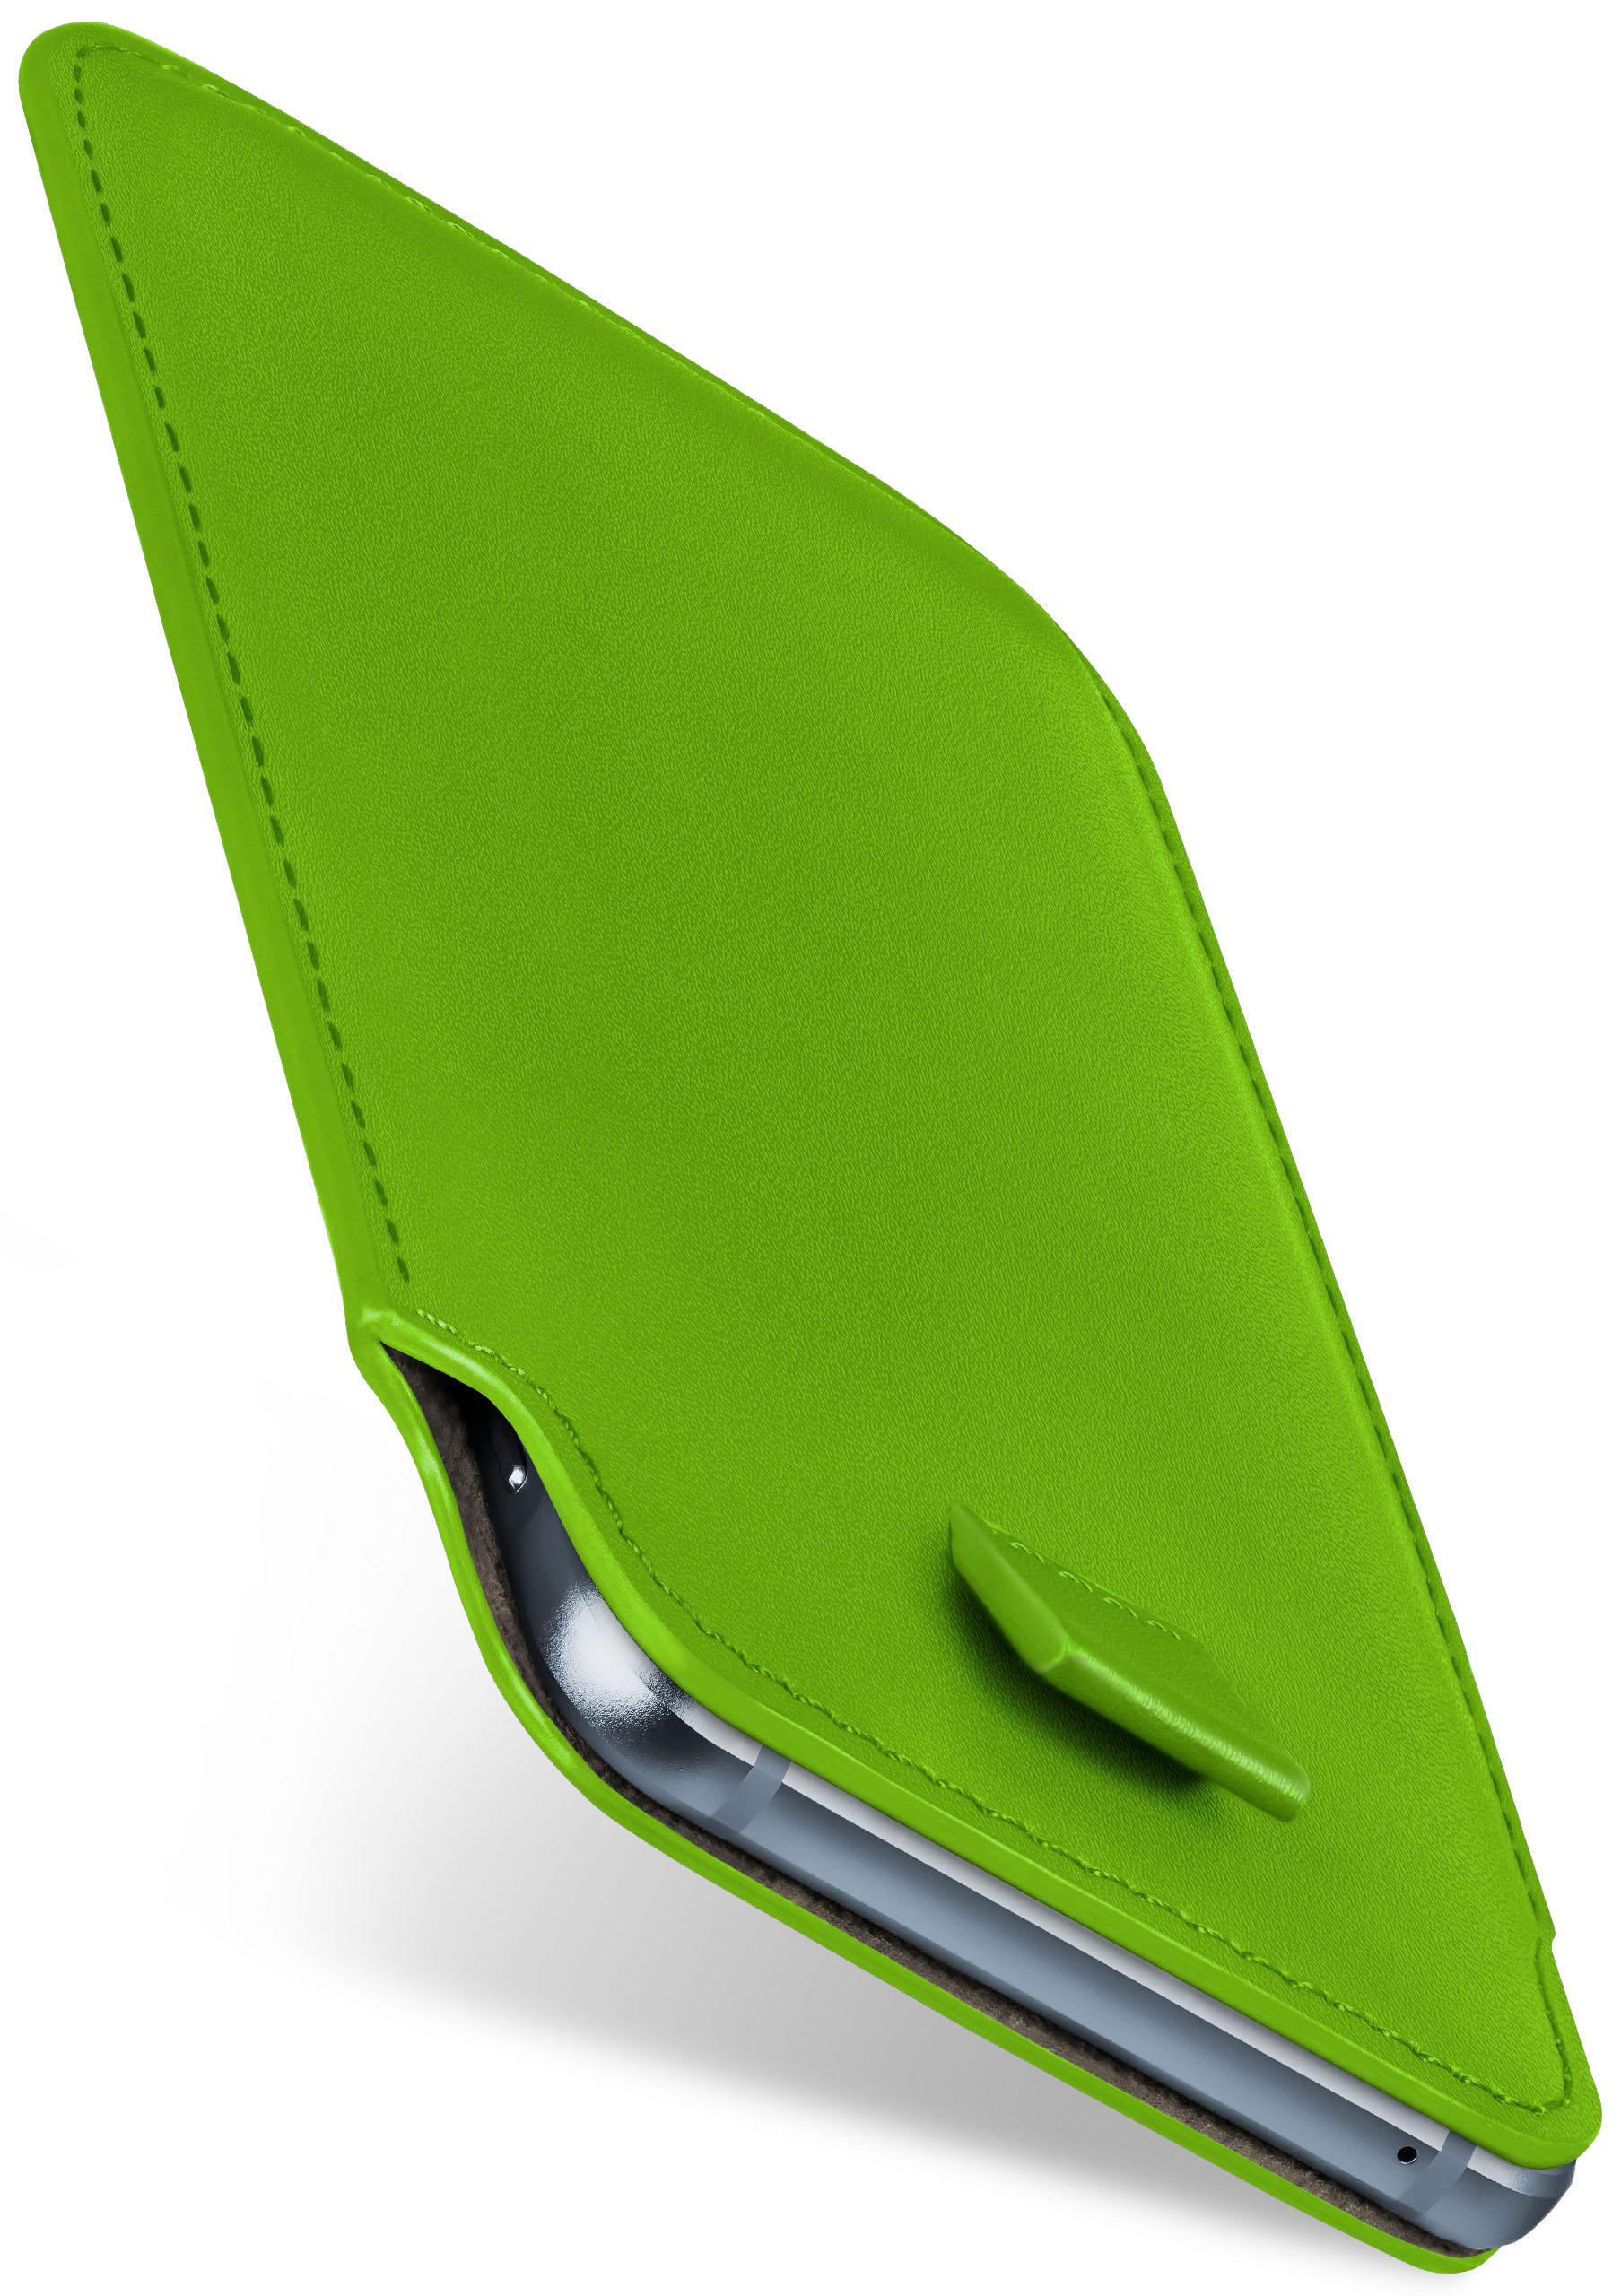 Full Sony, Case, Lime-Green Cover, Slide MOEX Xperia L2,